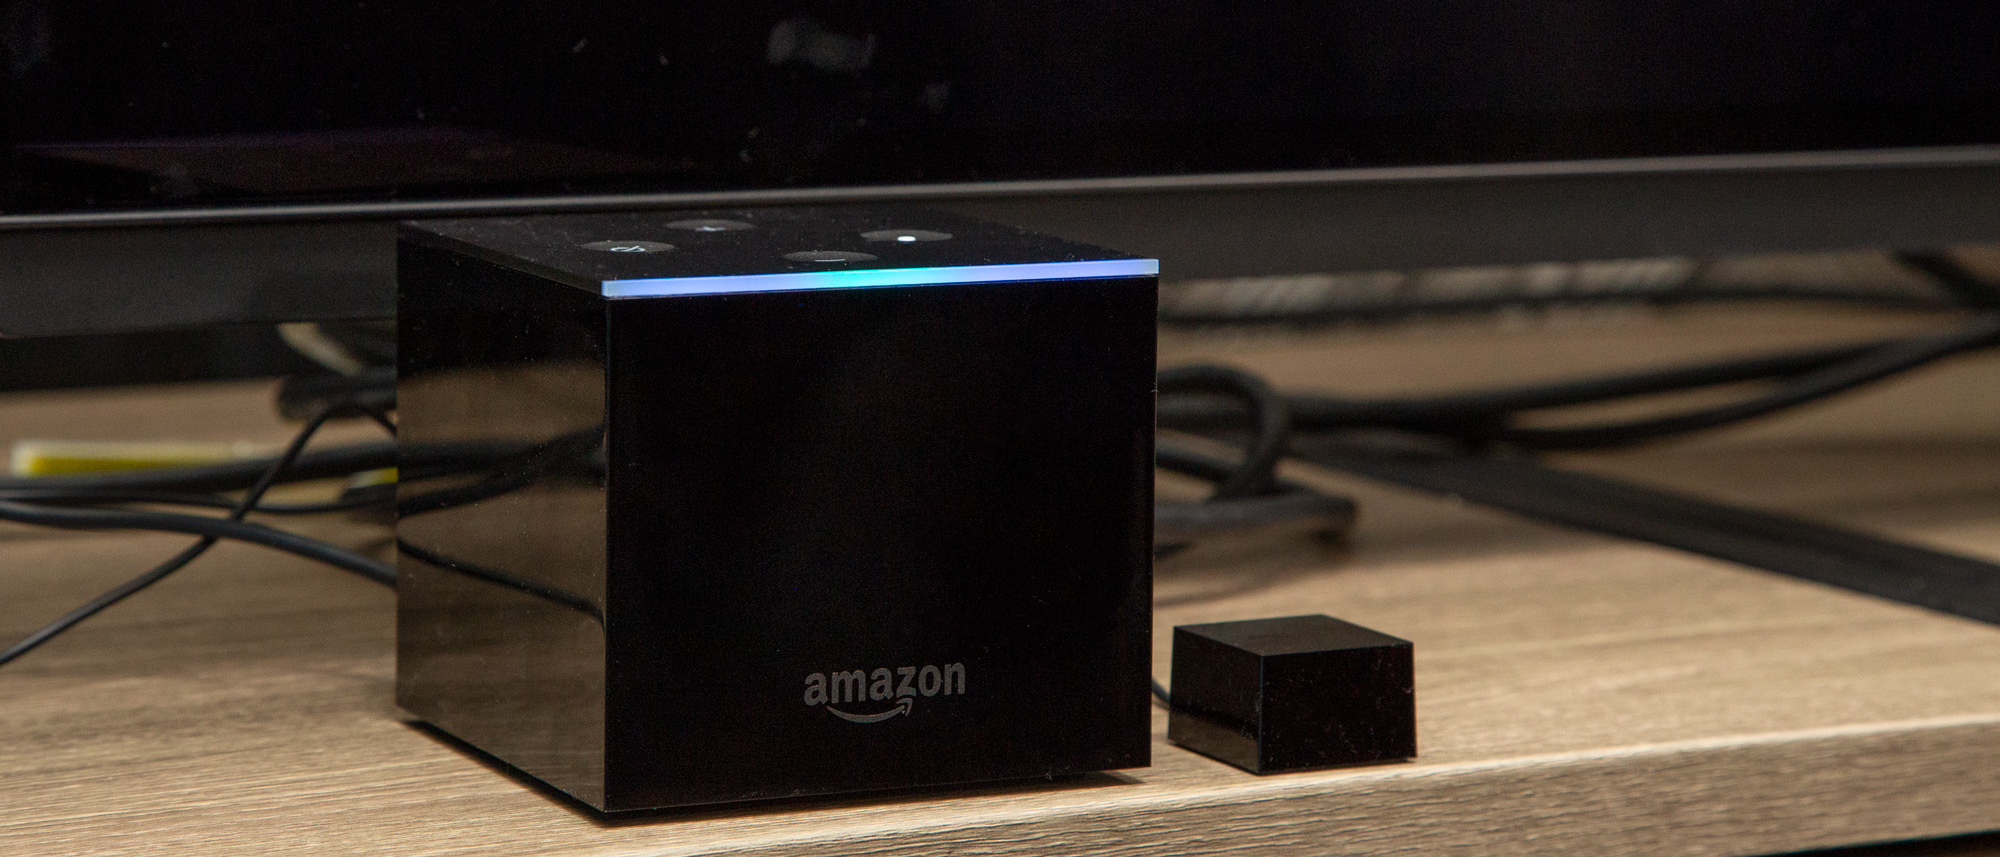 Amazon Fire TV Cube (2nd Gen) Review | Tom's Guide